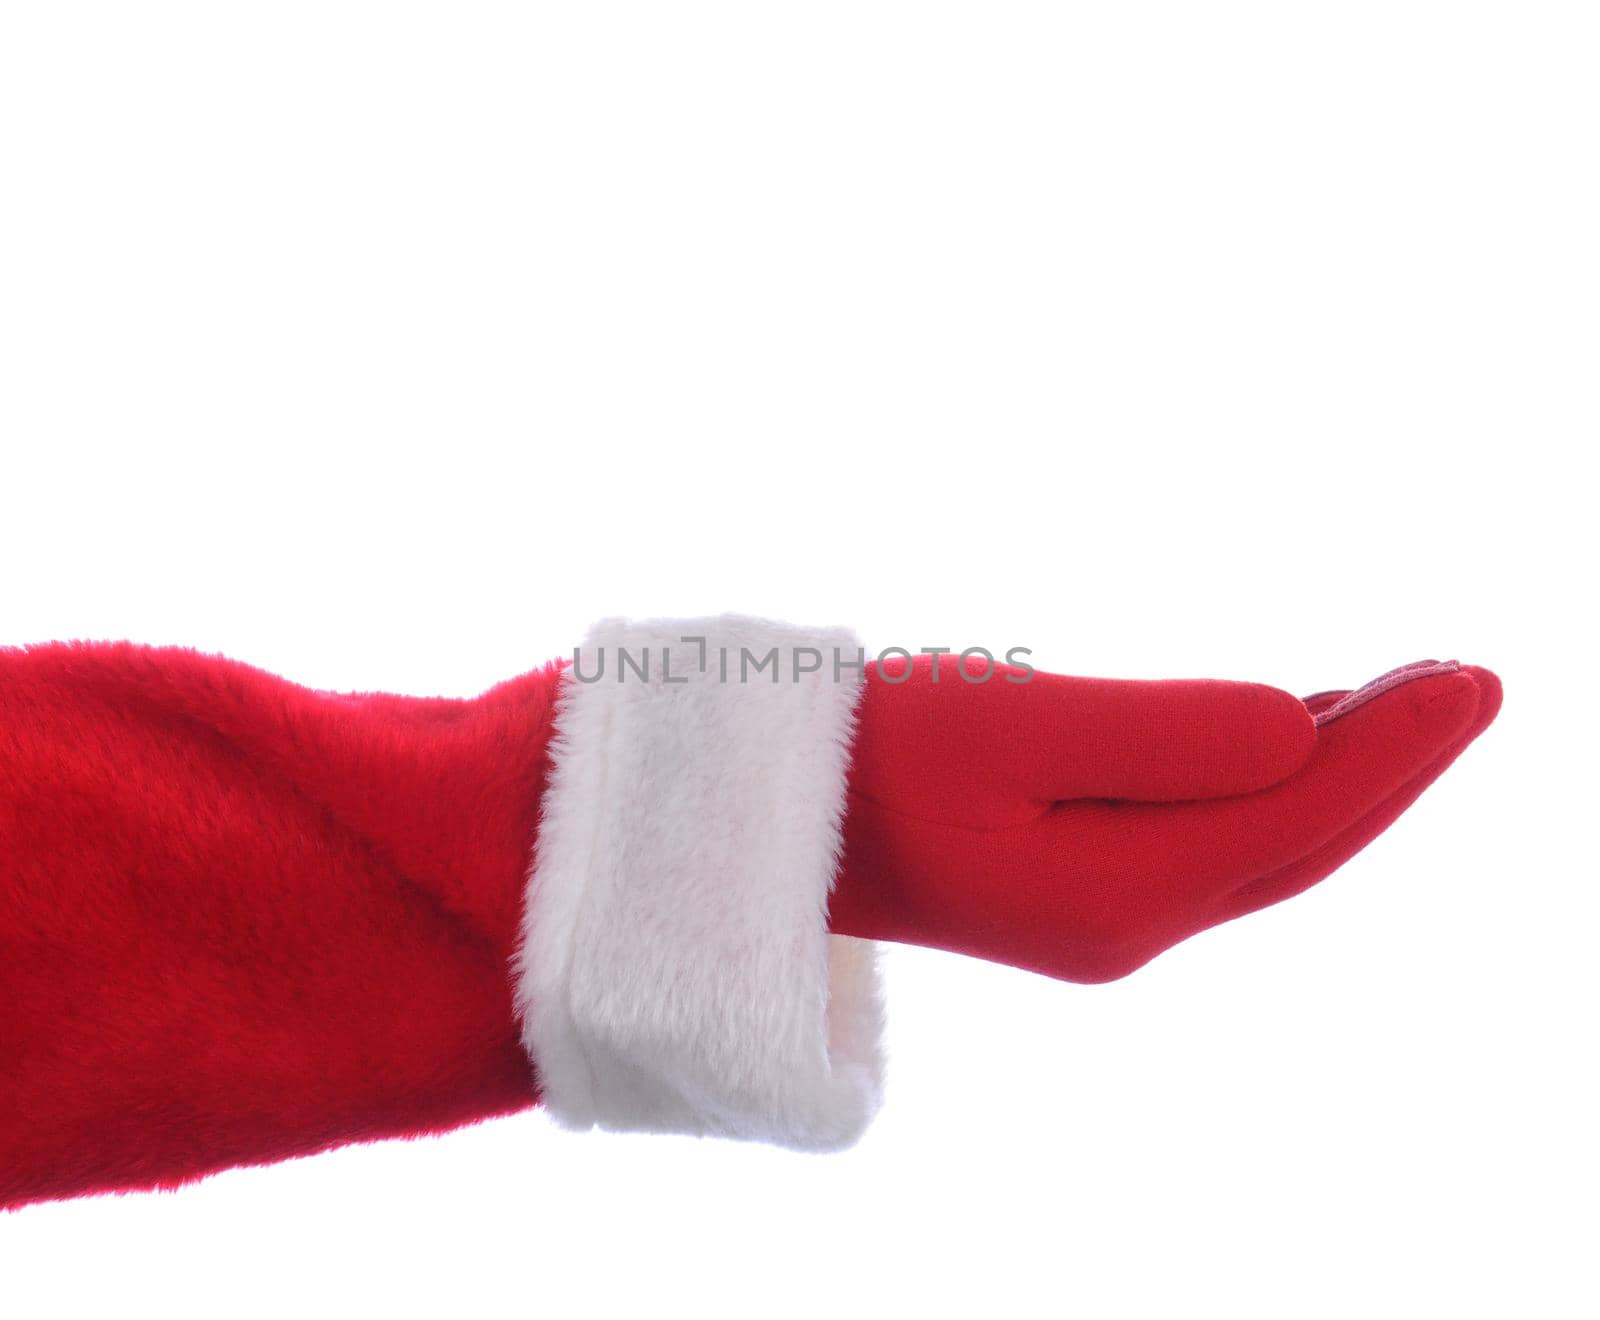 Santa Claus outstretched hand palm up by sCukrov